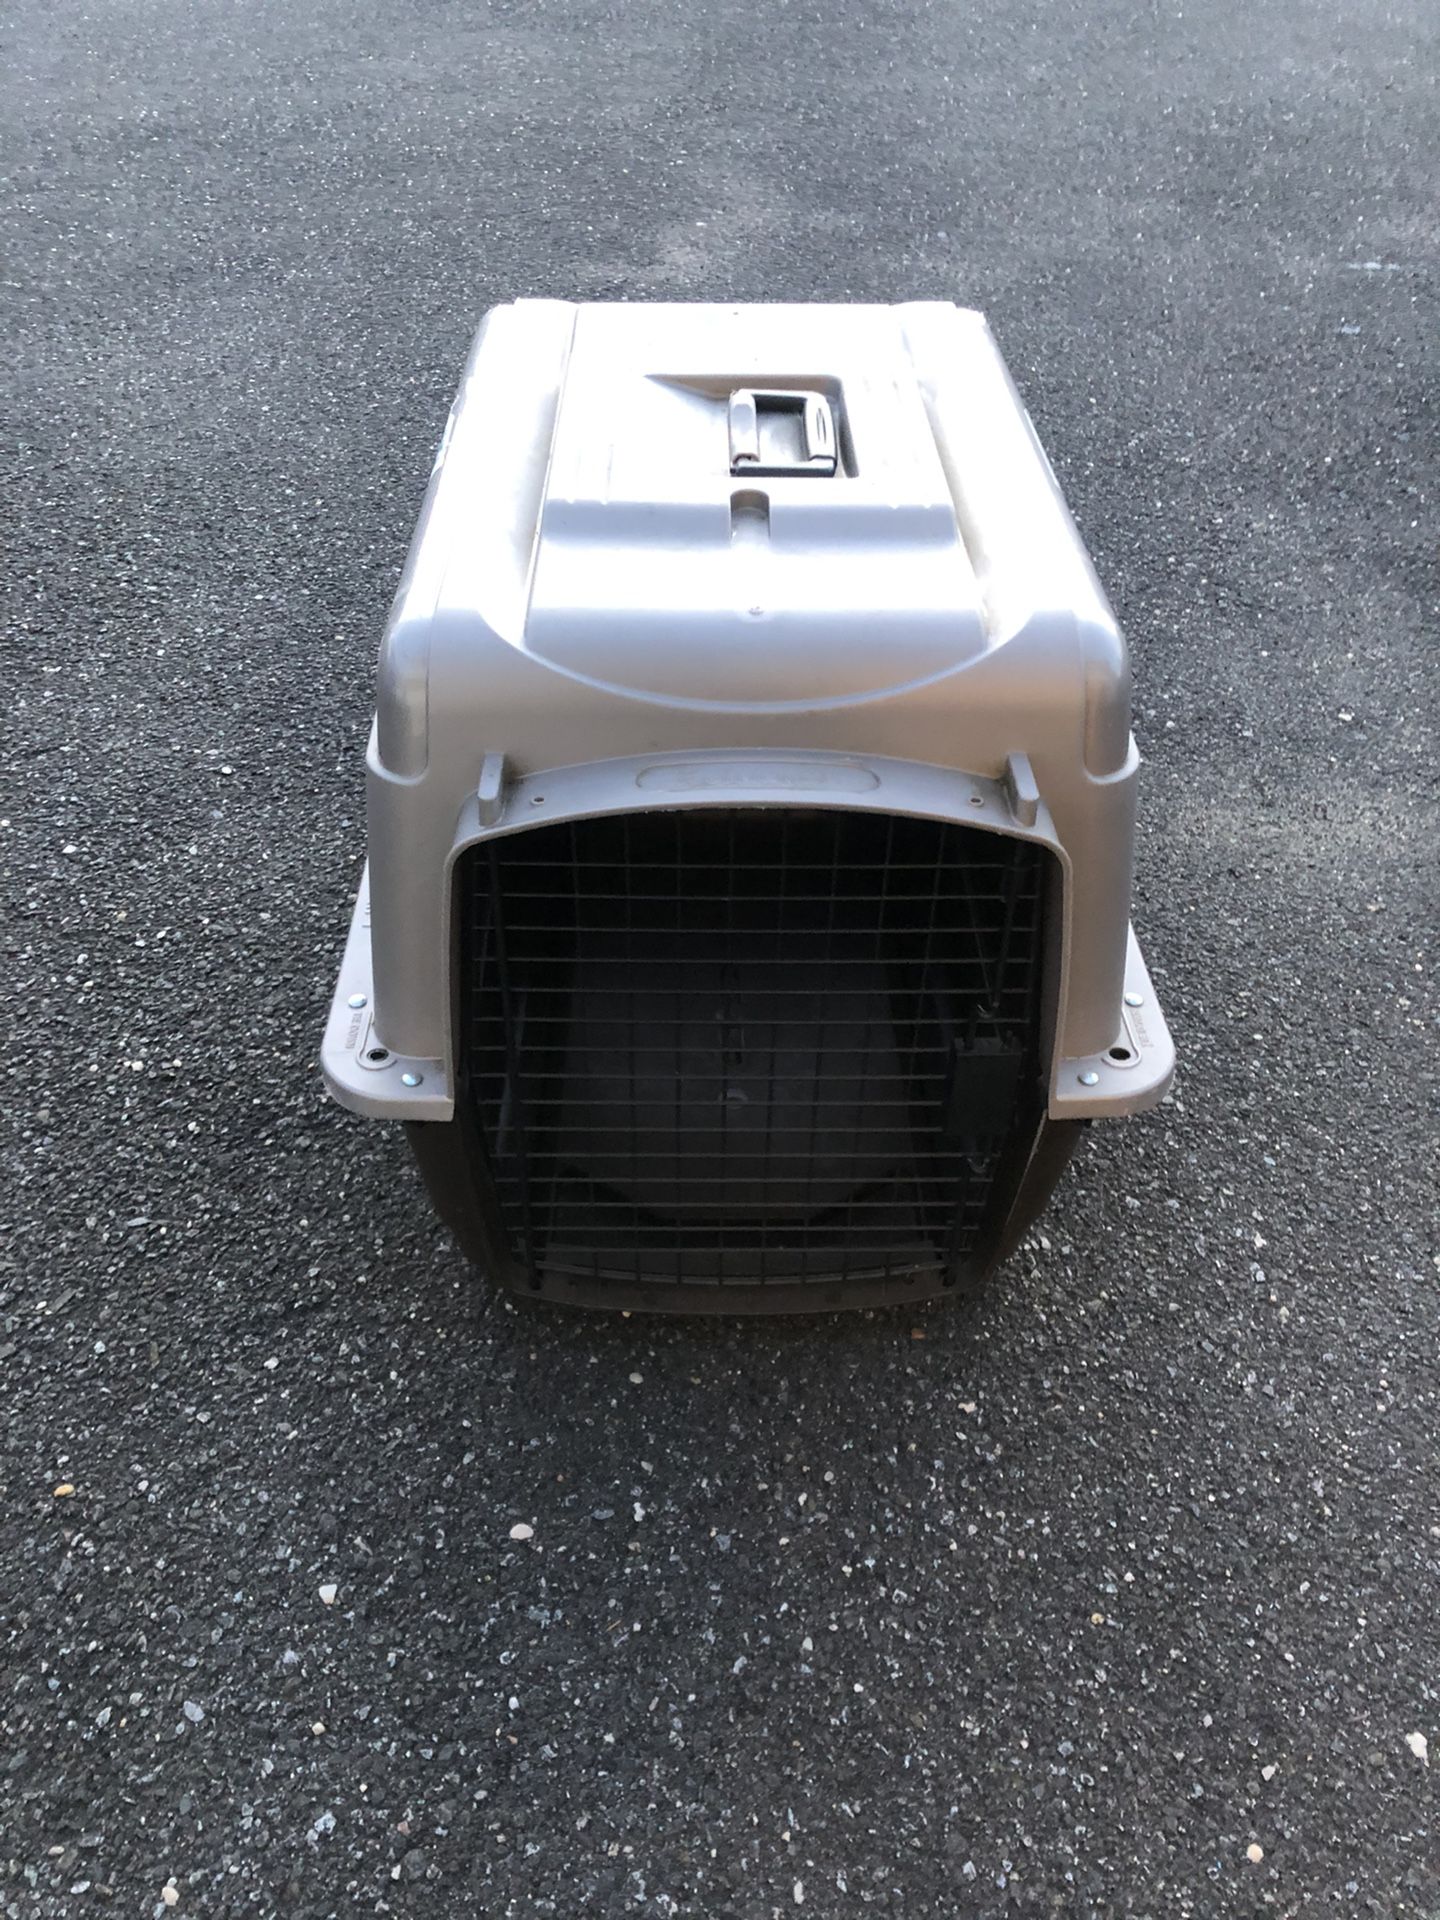 Travel Crate Kennel For Small Dog Or Cat